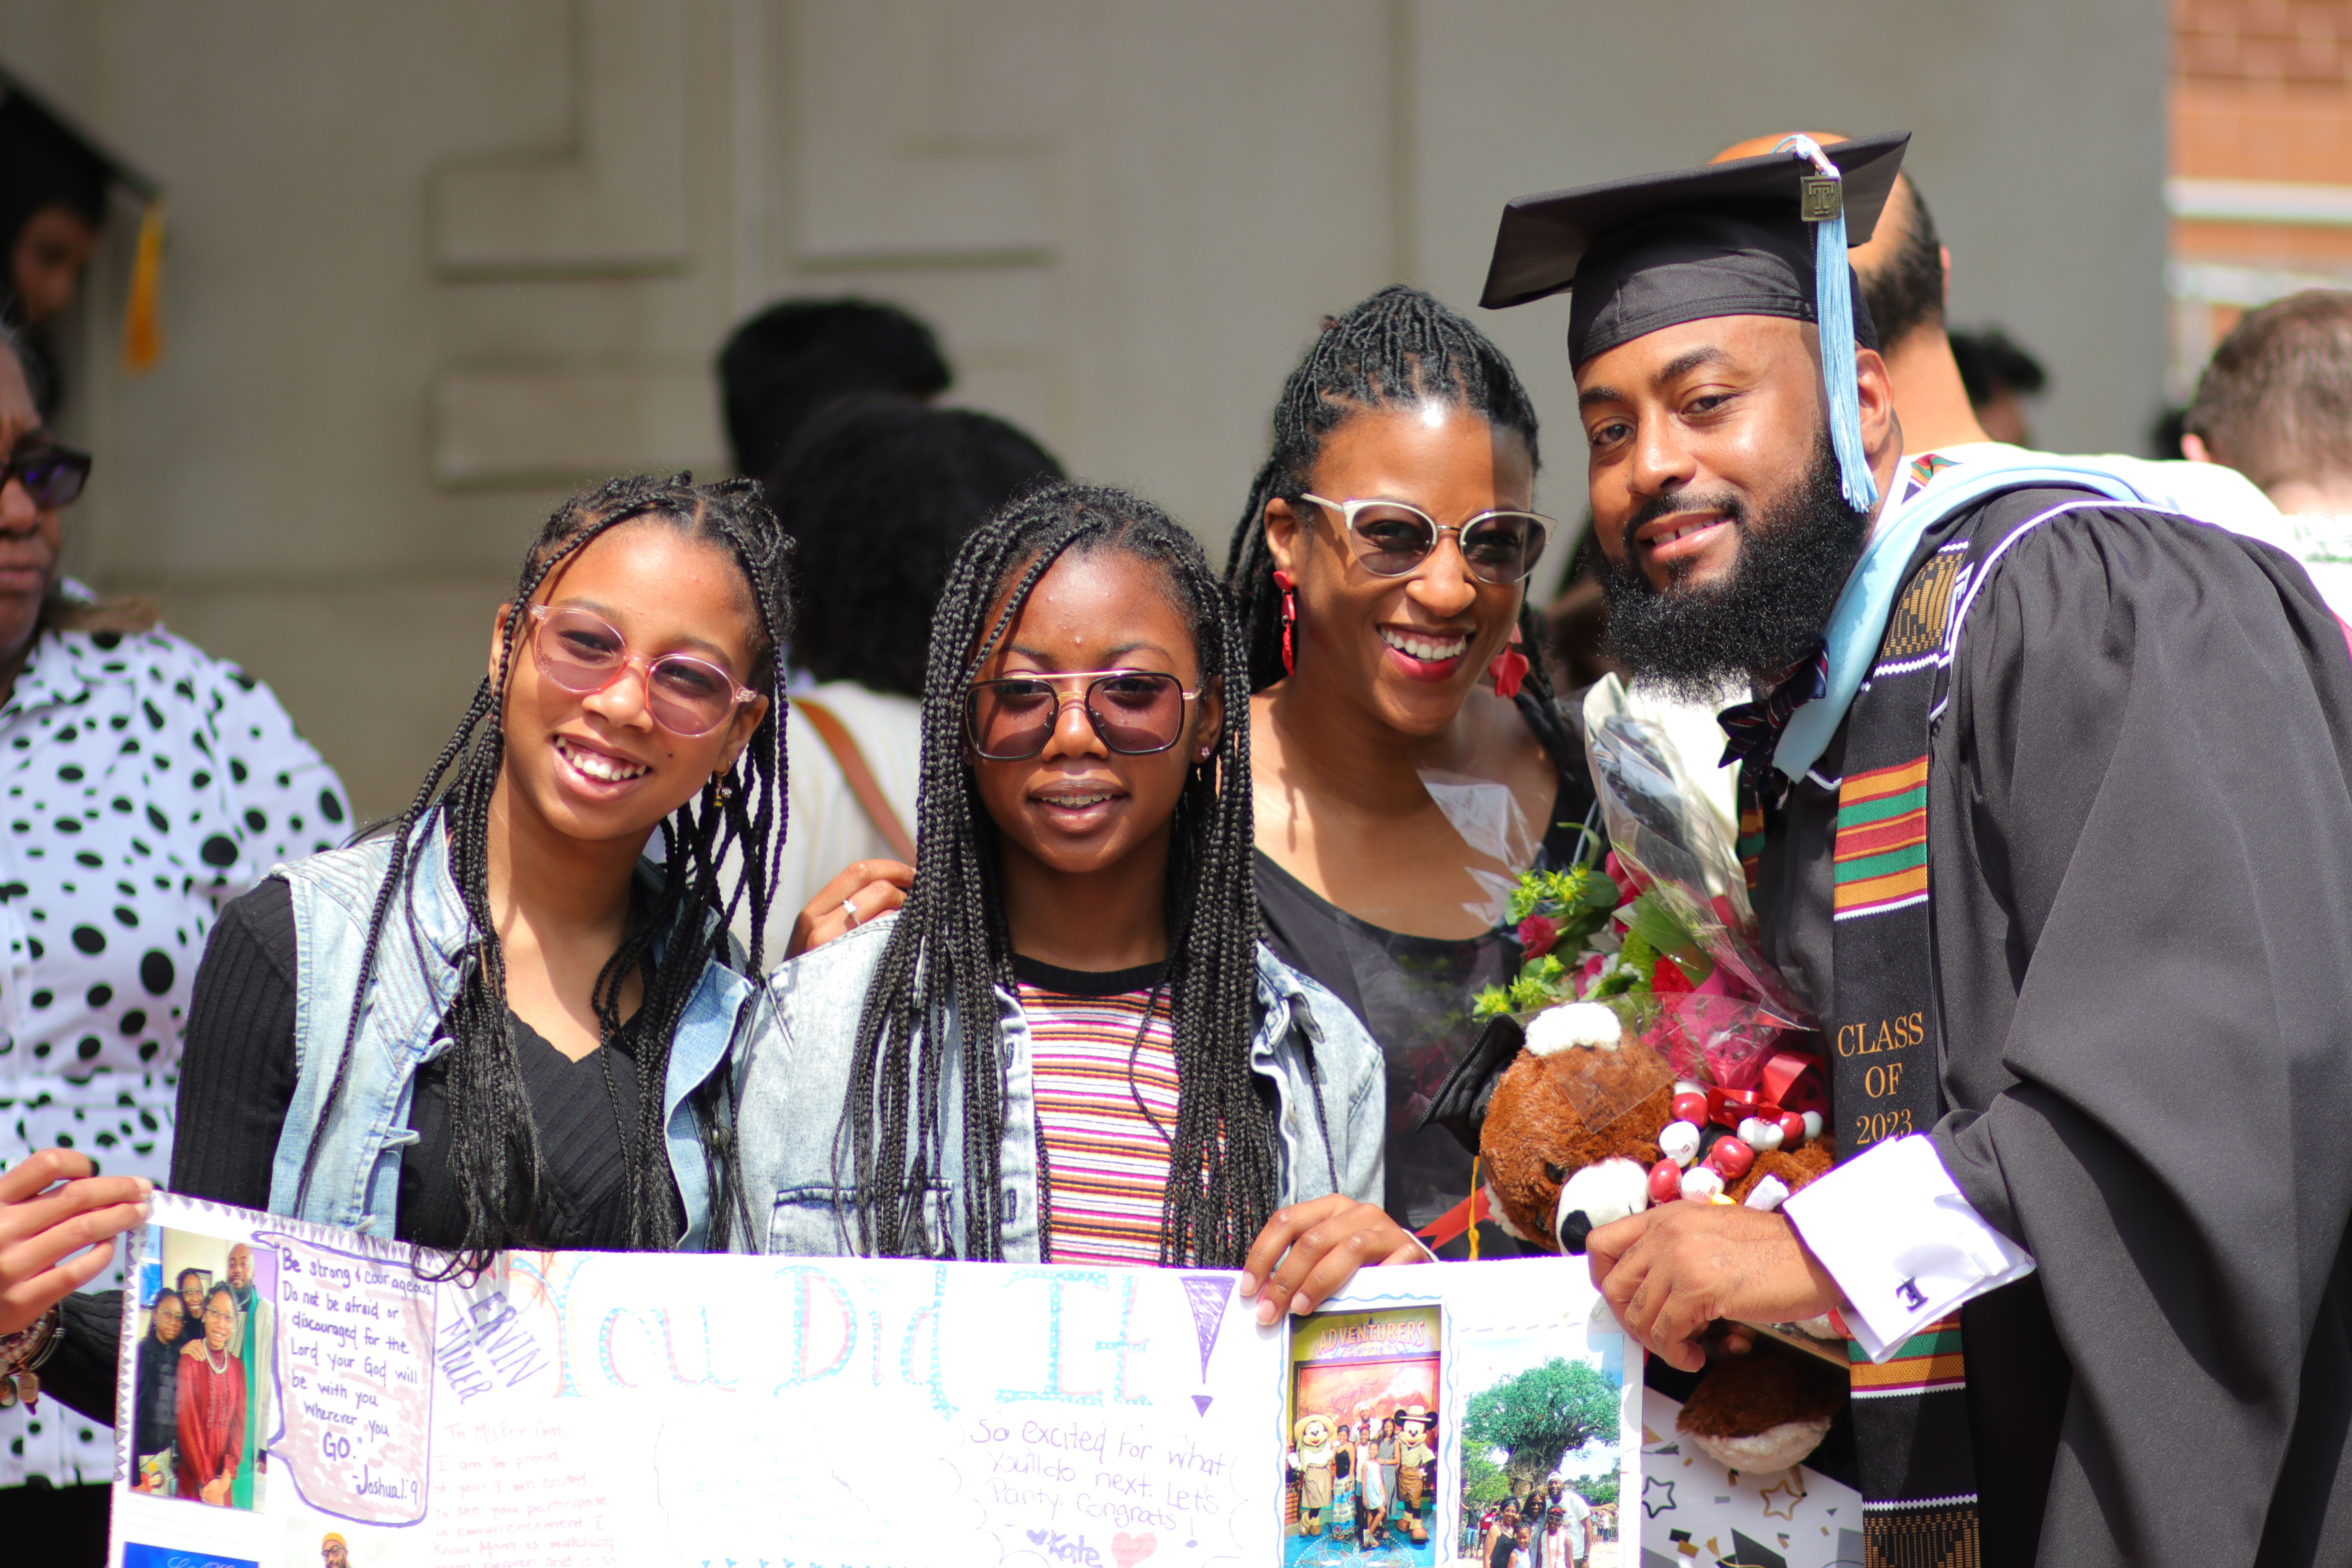 Graduate student poses with family